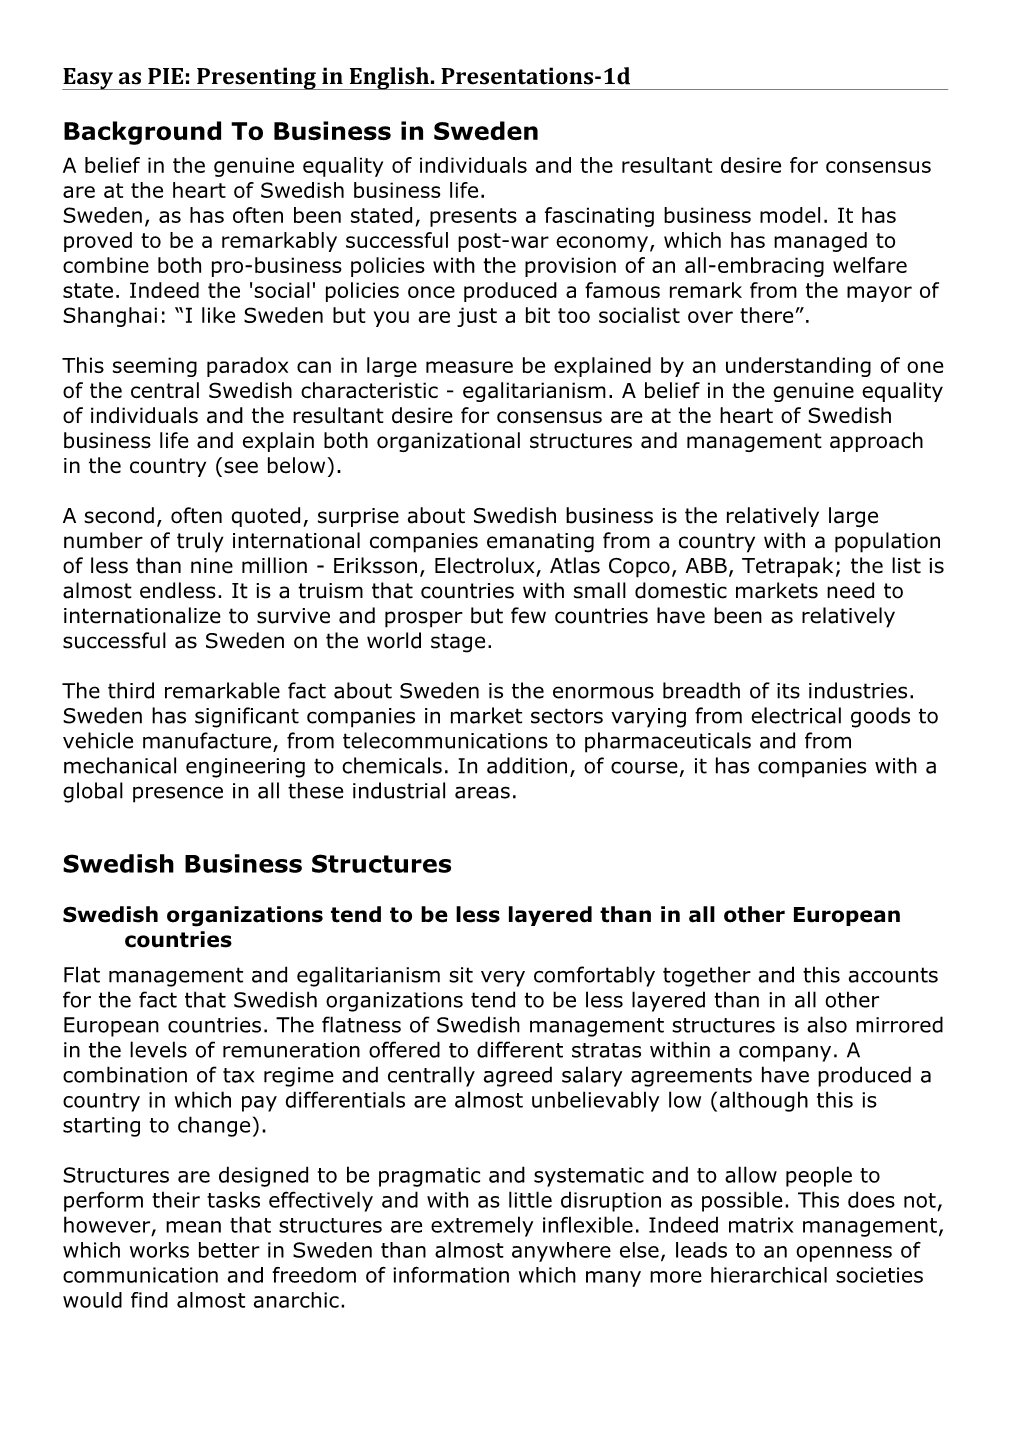 Background to Business in Sweden